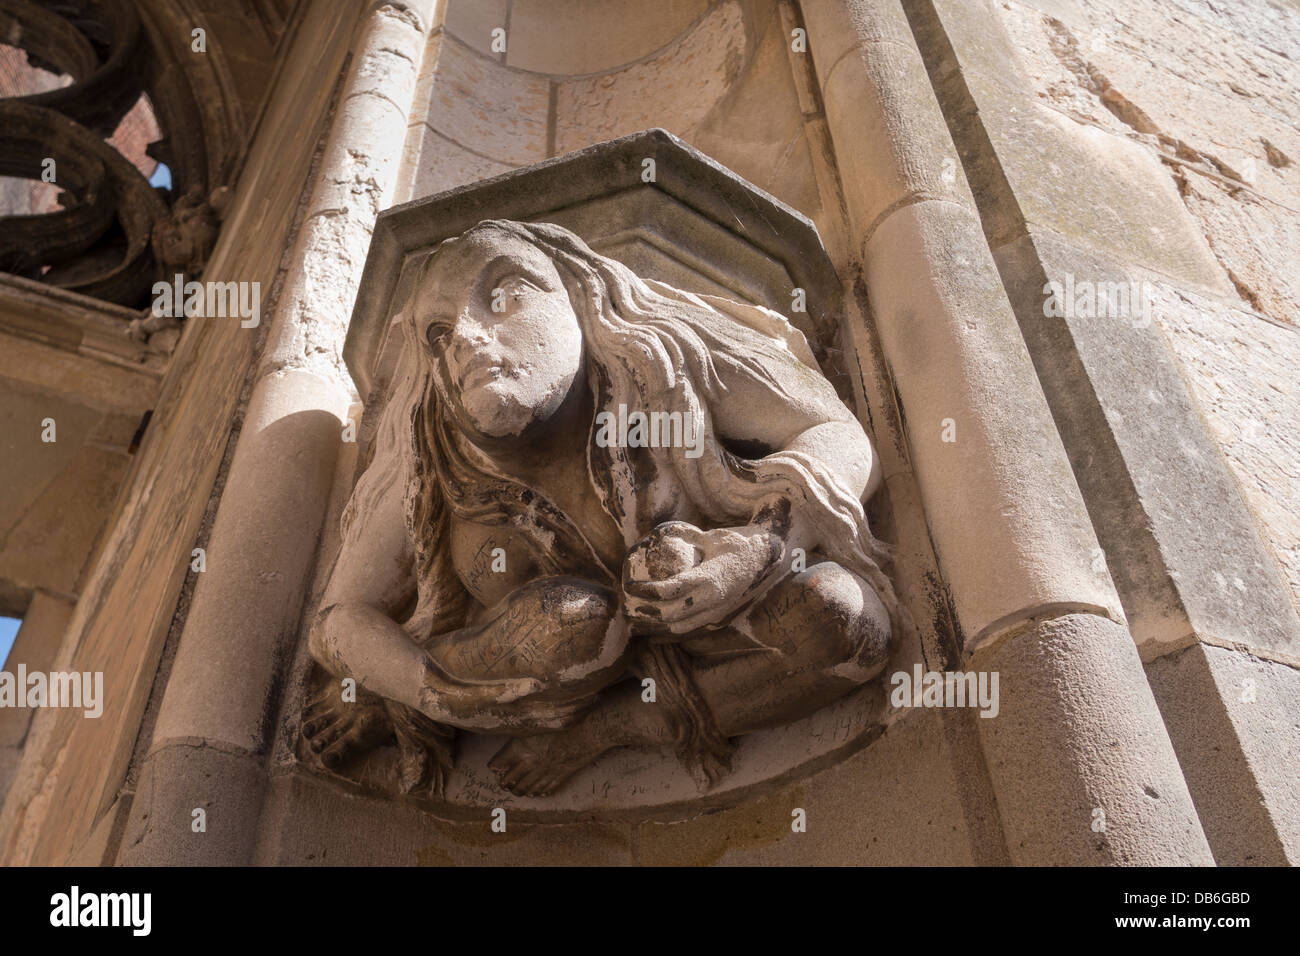 Woman Sculpture with Graffiti. Old graffiti from the early 20th century adorns this enigmatic sculpture on the gothic portico Stock Photo